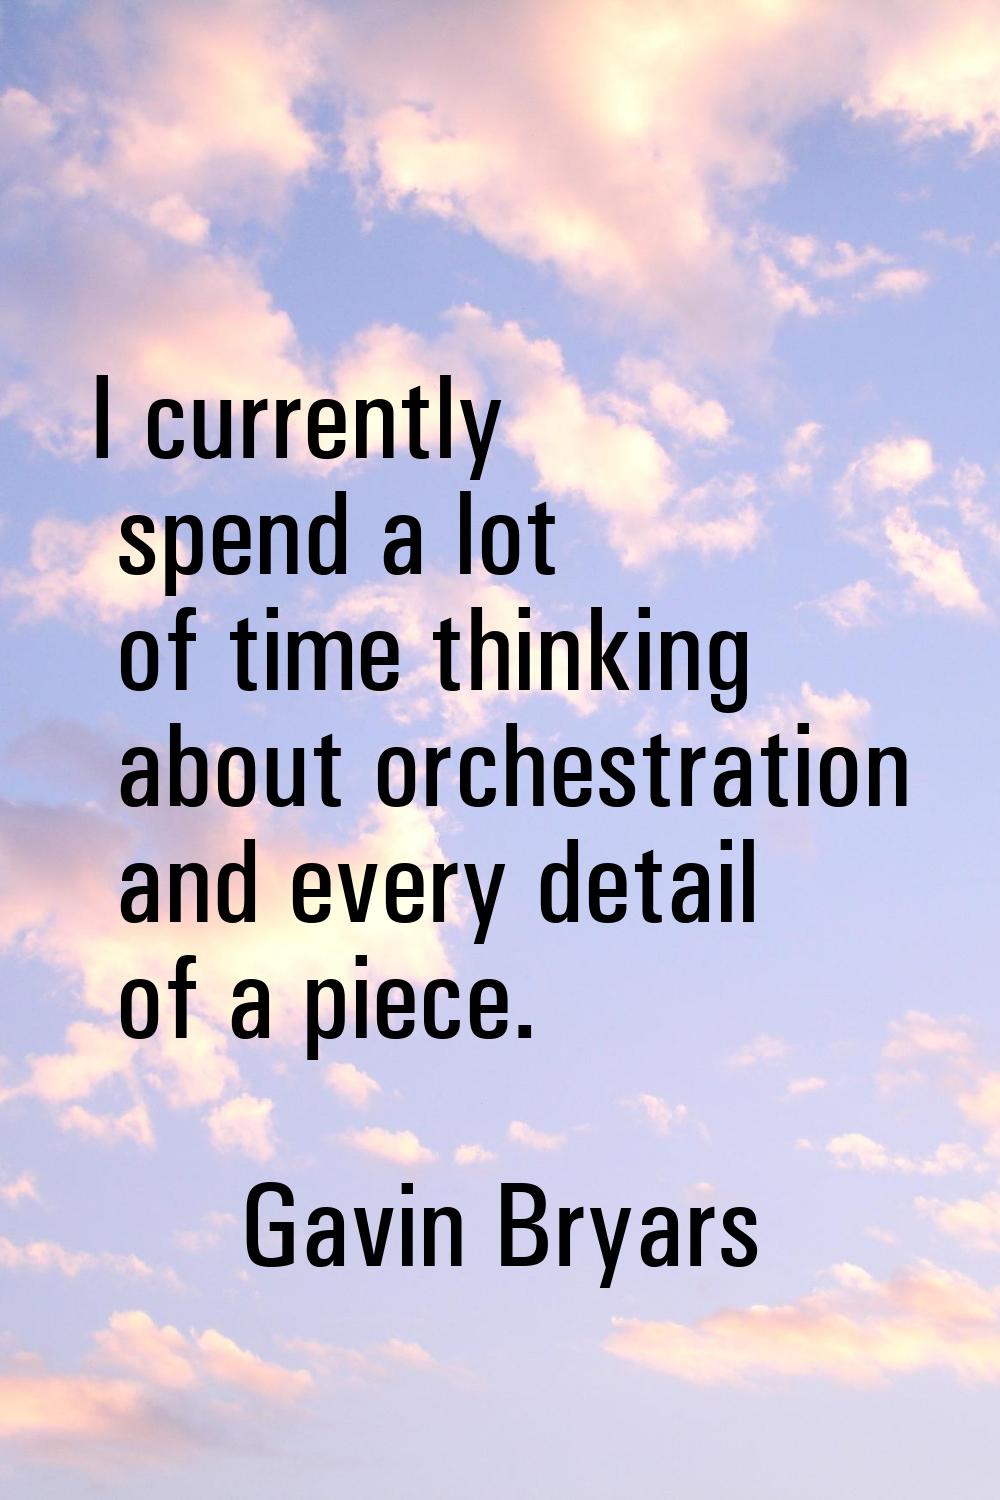 I currently spend a lot of time thinking about orchestration and every detail of a piece.